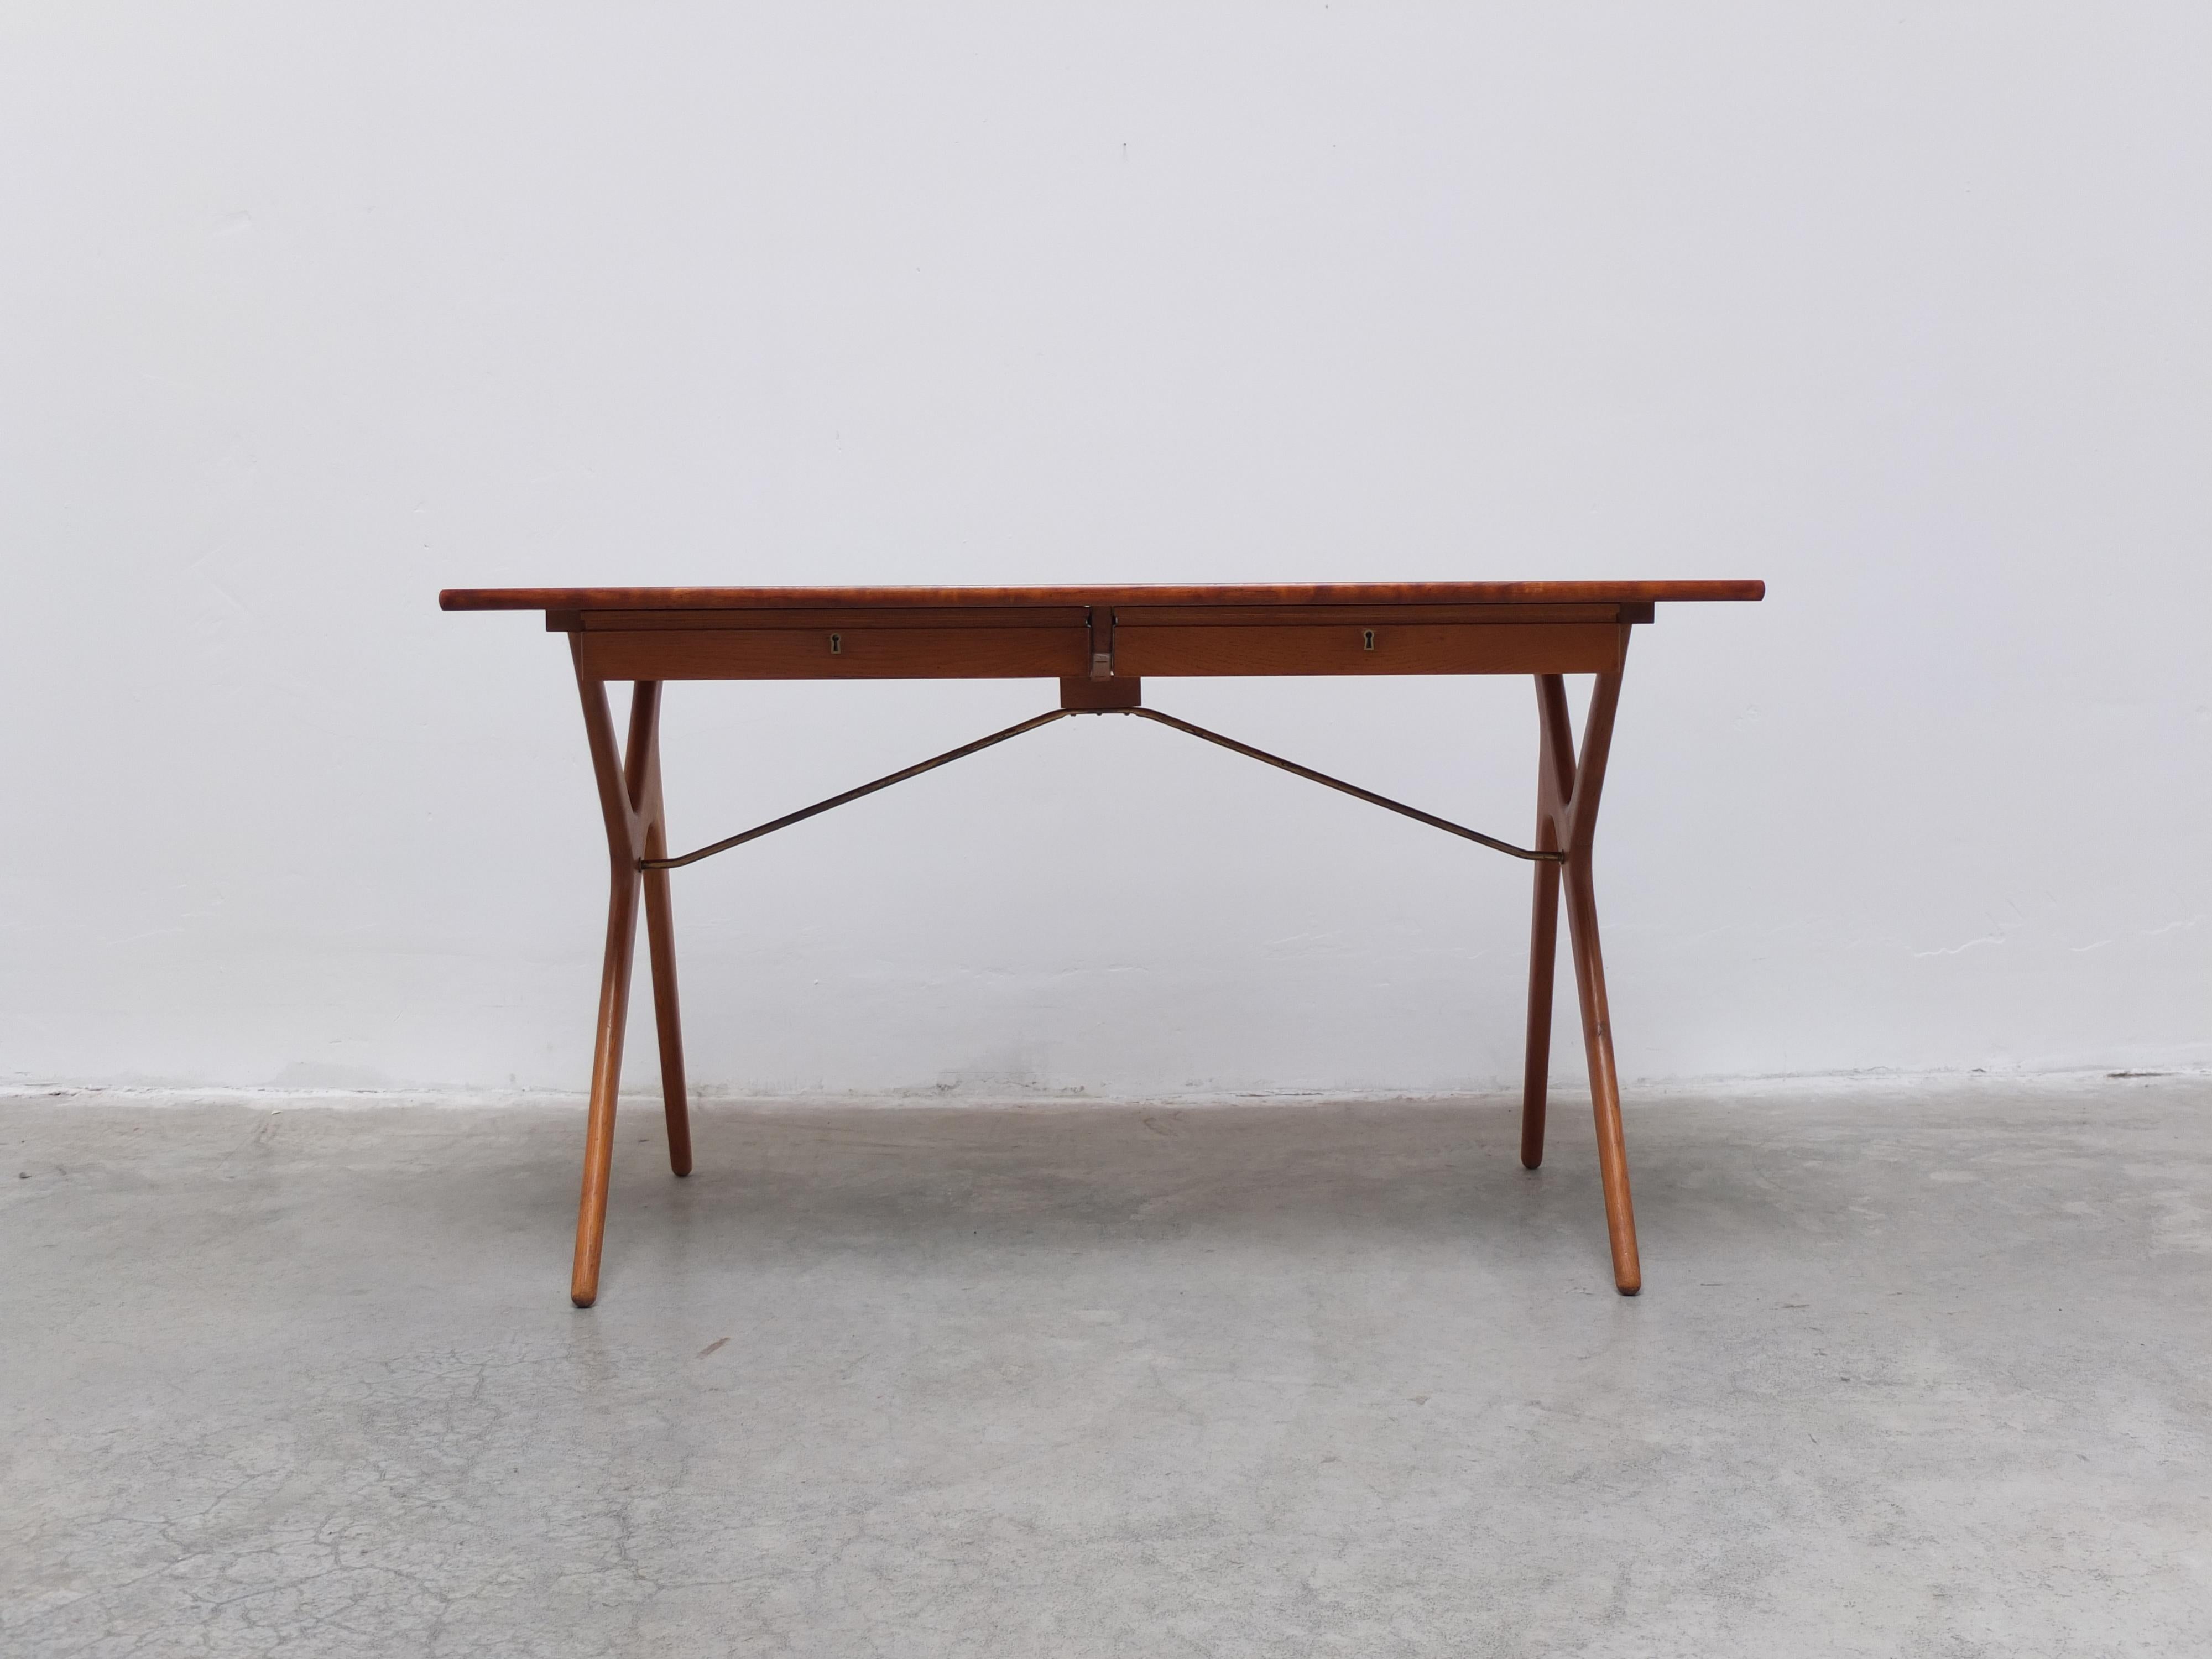 Rare desk produced in Denmark during the 1950s. The top is made of teak and the refined compass legs of solid oak. The whole is connected through a brass support bar. Underneath the top there are two compact drawers. Designer unknown but a great